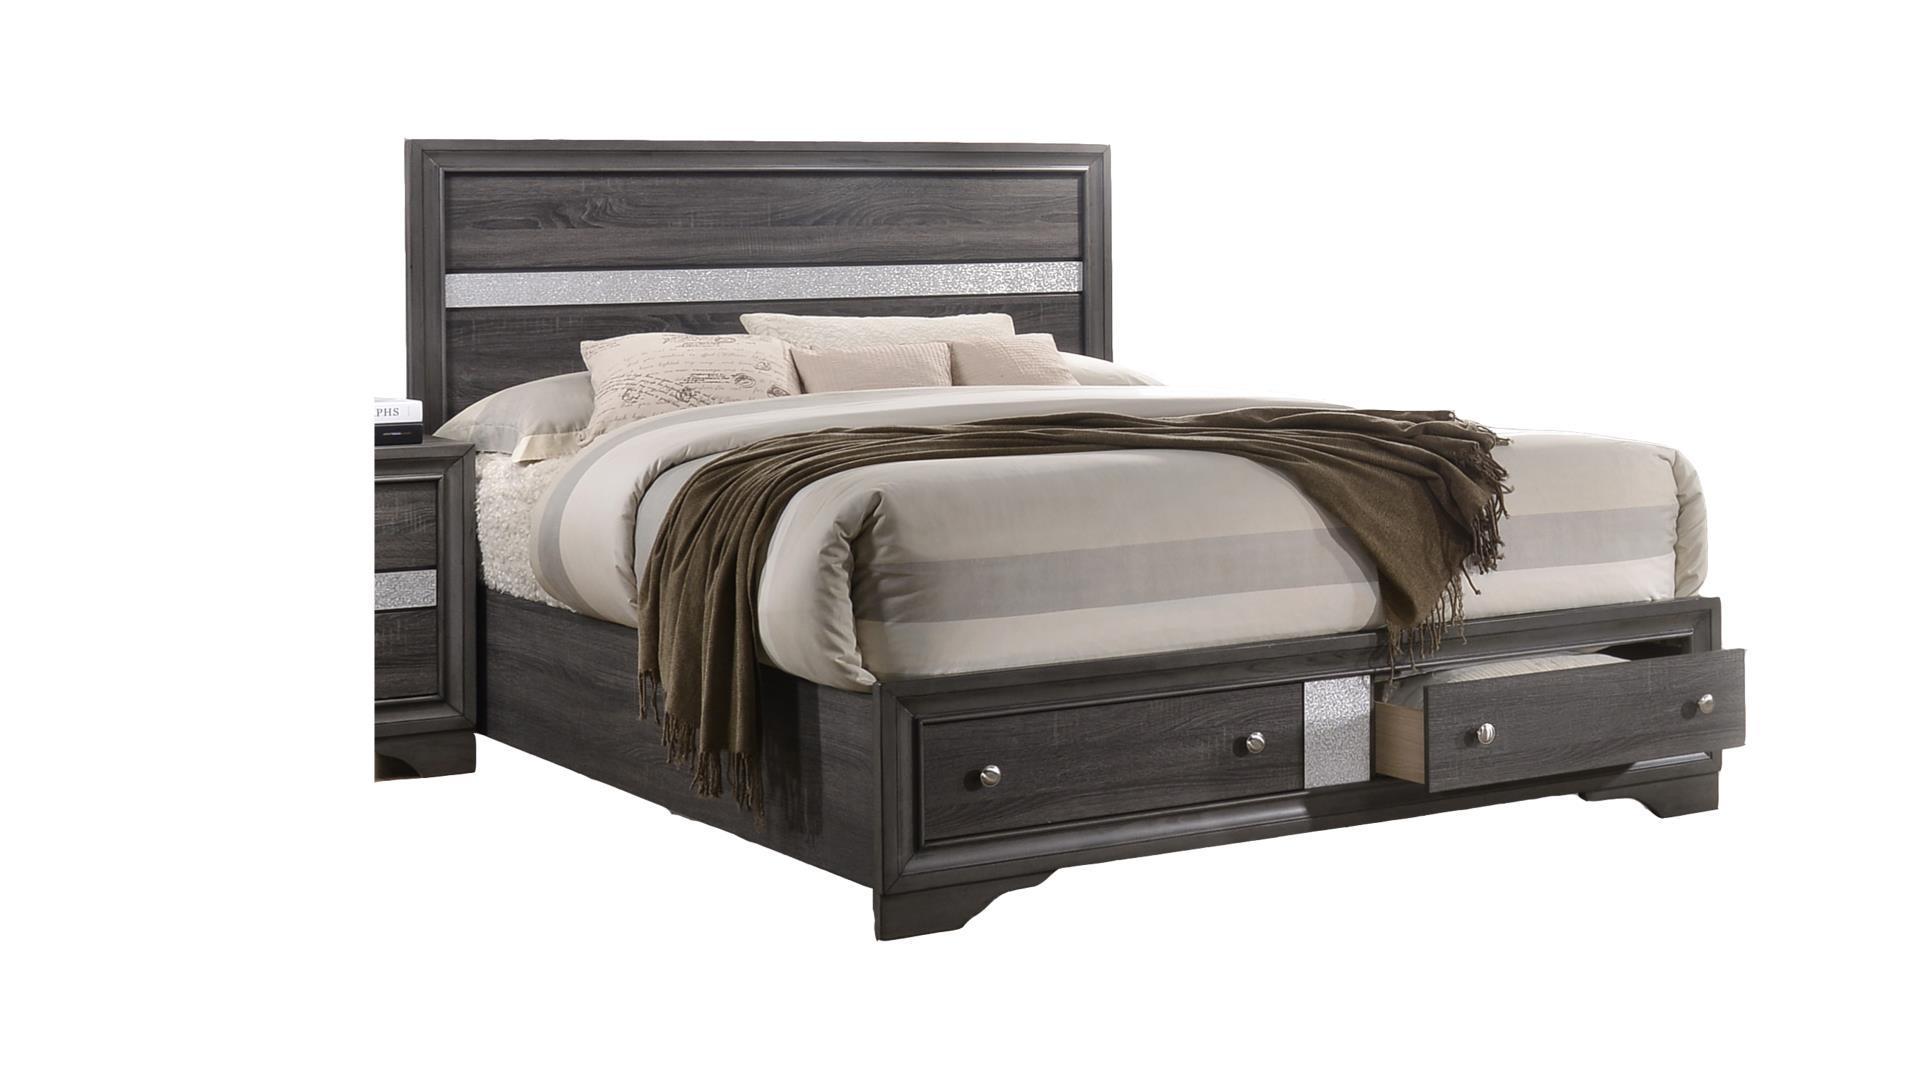 Contemporary, Modern Storage Bed MATRIX GHF-808857774057 in Gray 